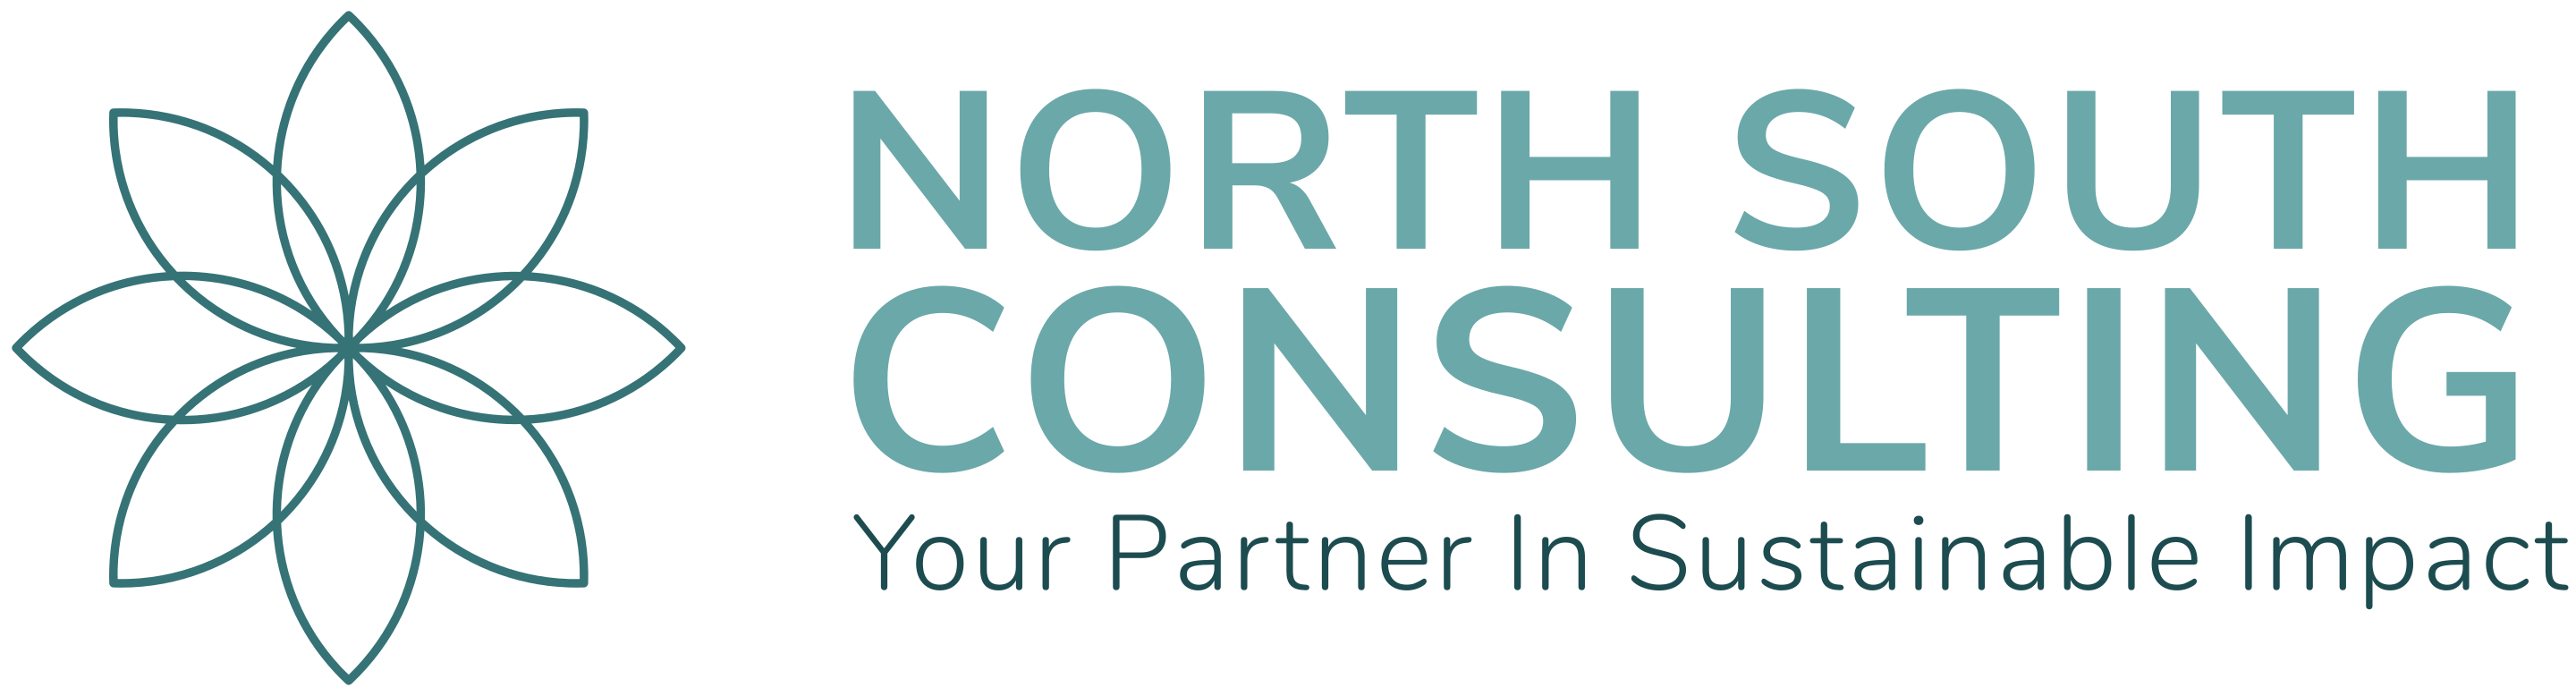 North South Consulting